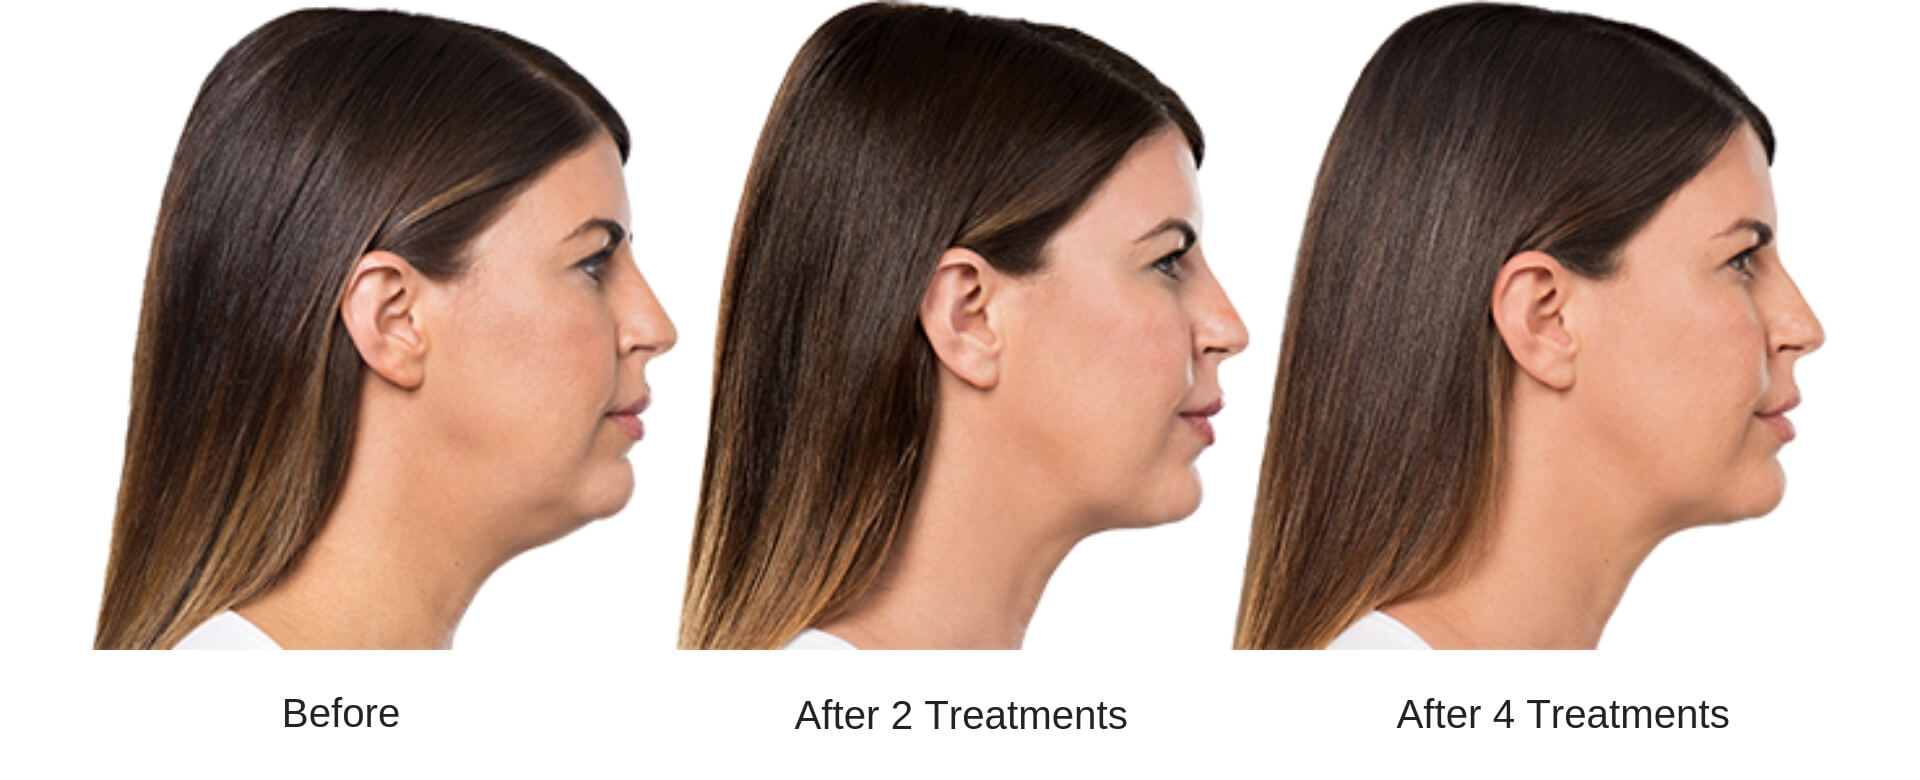 Woman's side profile showing the progression of results of before, after two treatments, and after four treatments of a Kybella series.